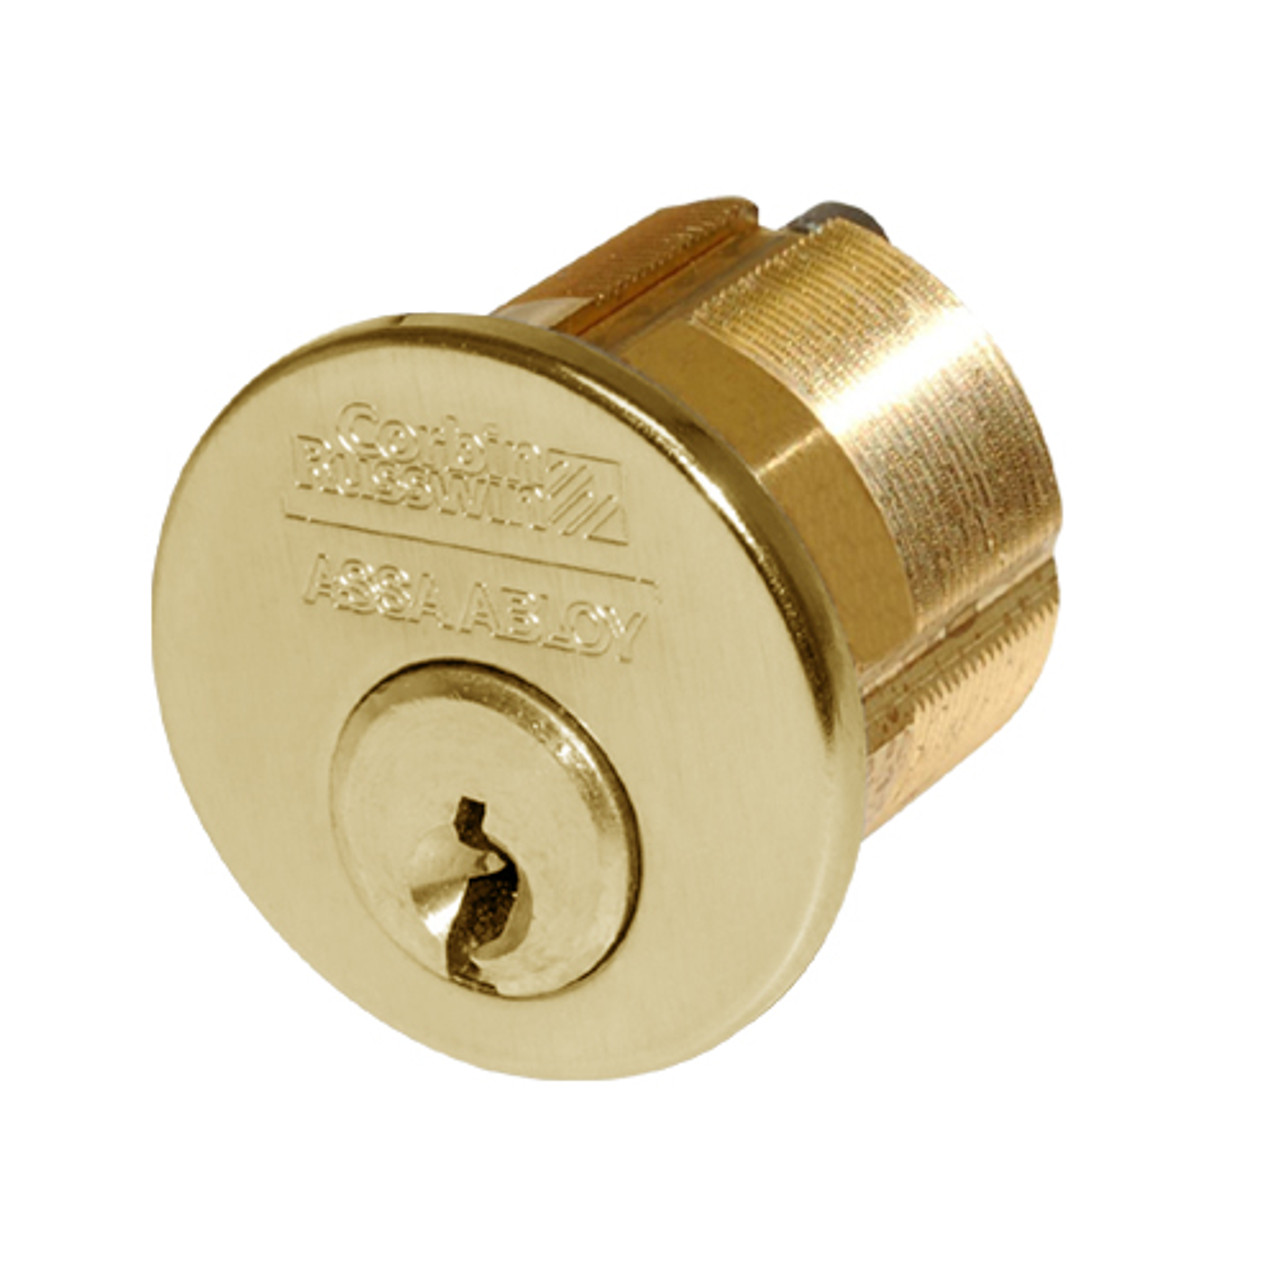 CR1000-200-A02-6-59A1-605 Corbin Conventional Mortise Cylinder for Mortise Lock and DL3000 Deadlocks with Straight Cam in Bright Brass Finish